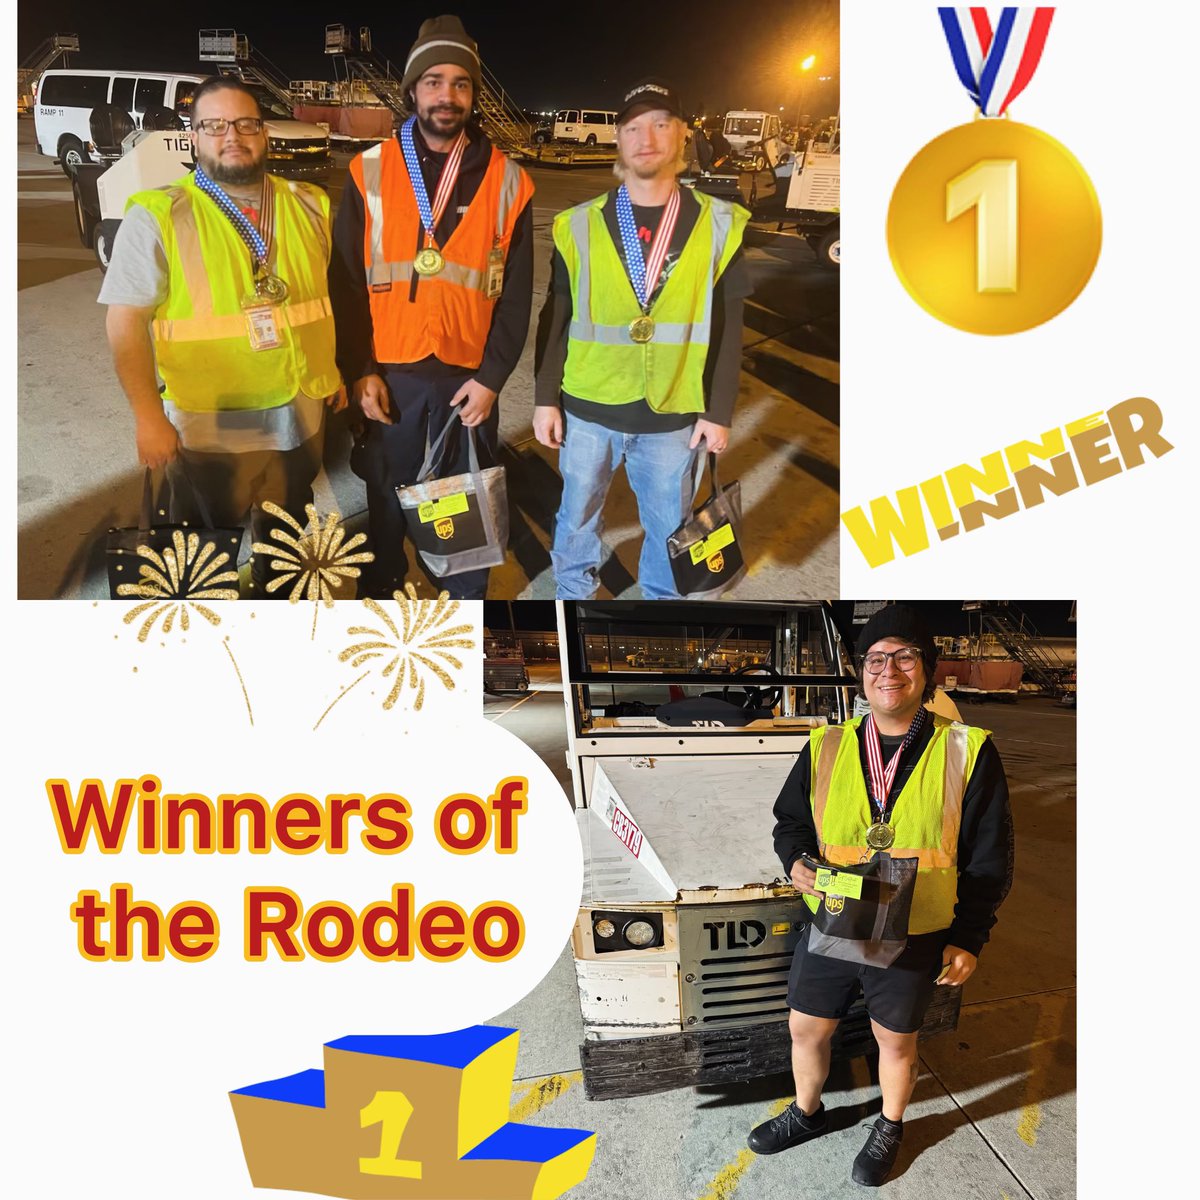 🤠Winners of the PED Rodeo!! 🐴 Eder, Derek, Robert, Richard!!! Thank you to everyone who helped and participated!! This will definitely not be the last RODEO we do!! March 2024 May the Best Cowboy or cowgirl WIN!! @G_Smith17 @Shelby2017goair @mboden69 @renodames @BlanchardLyle